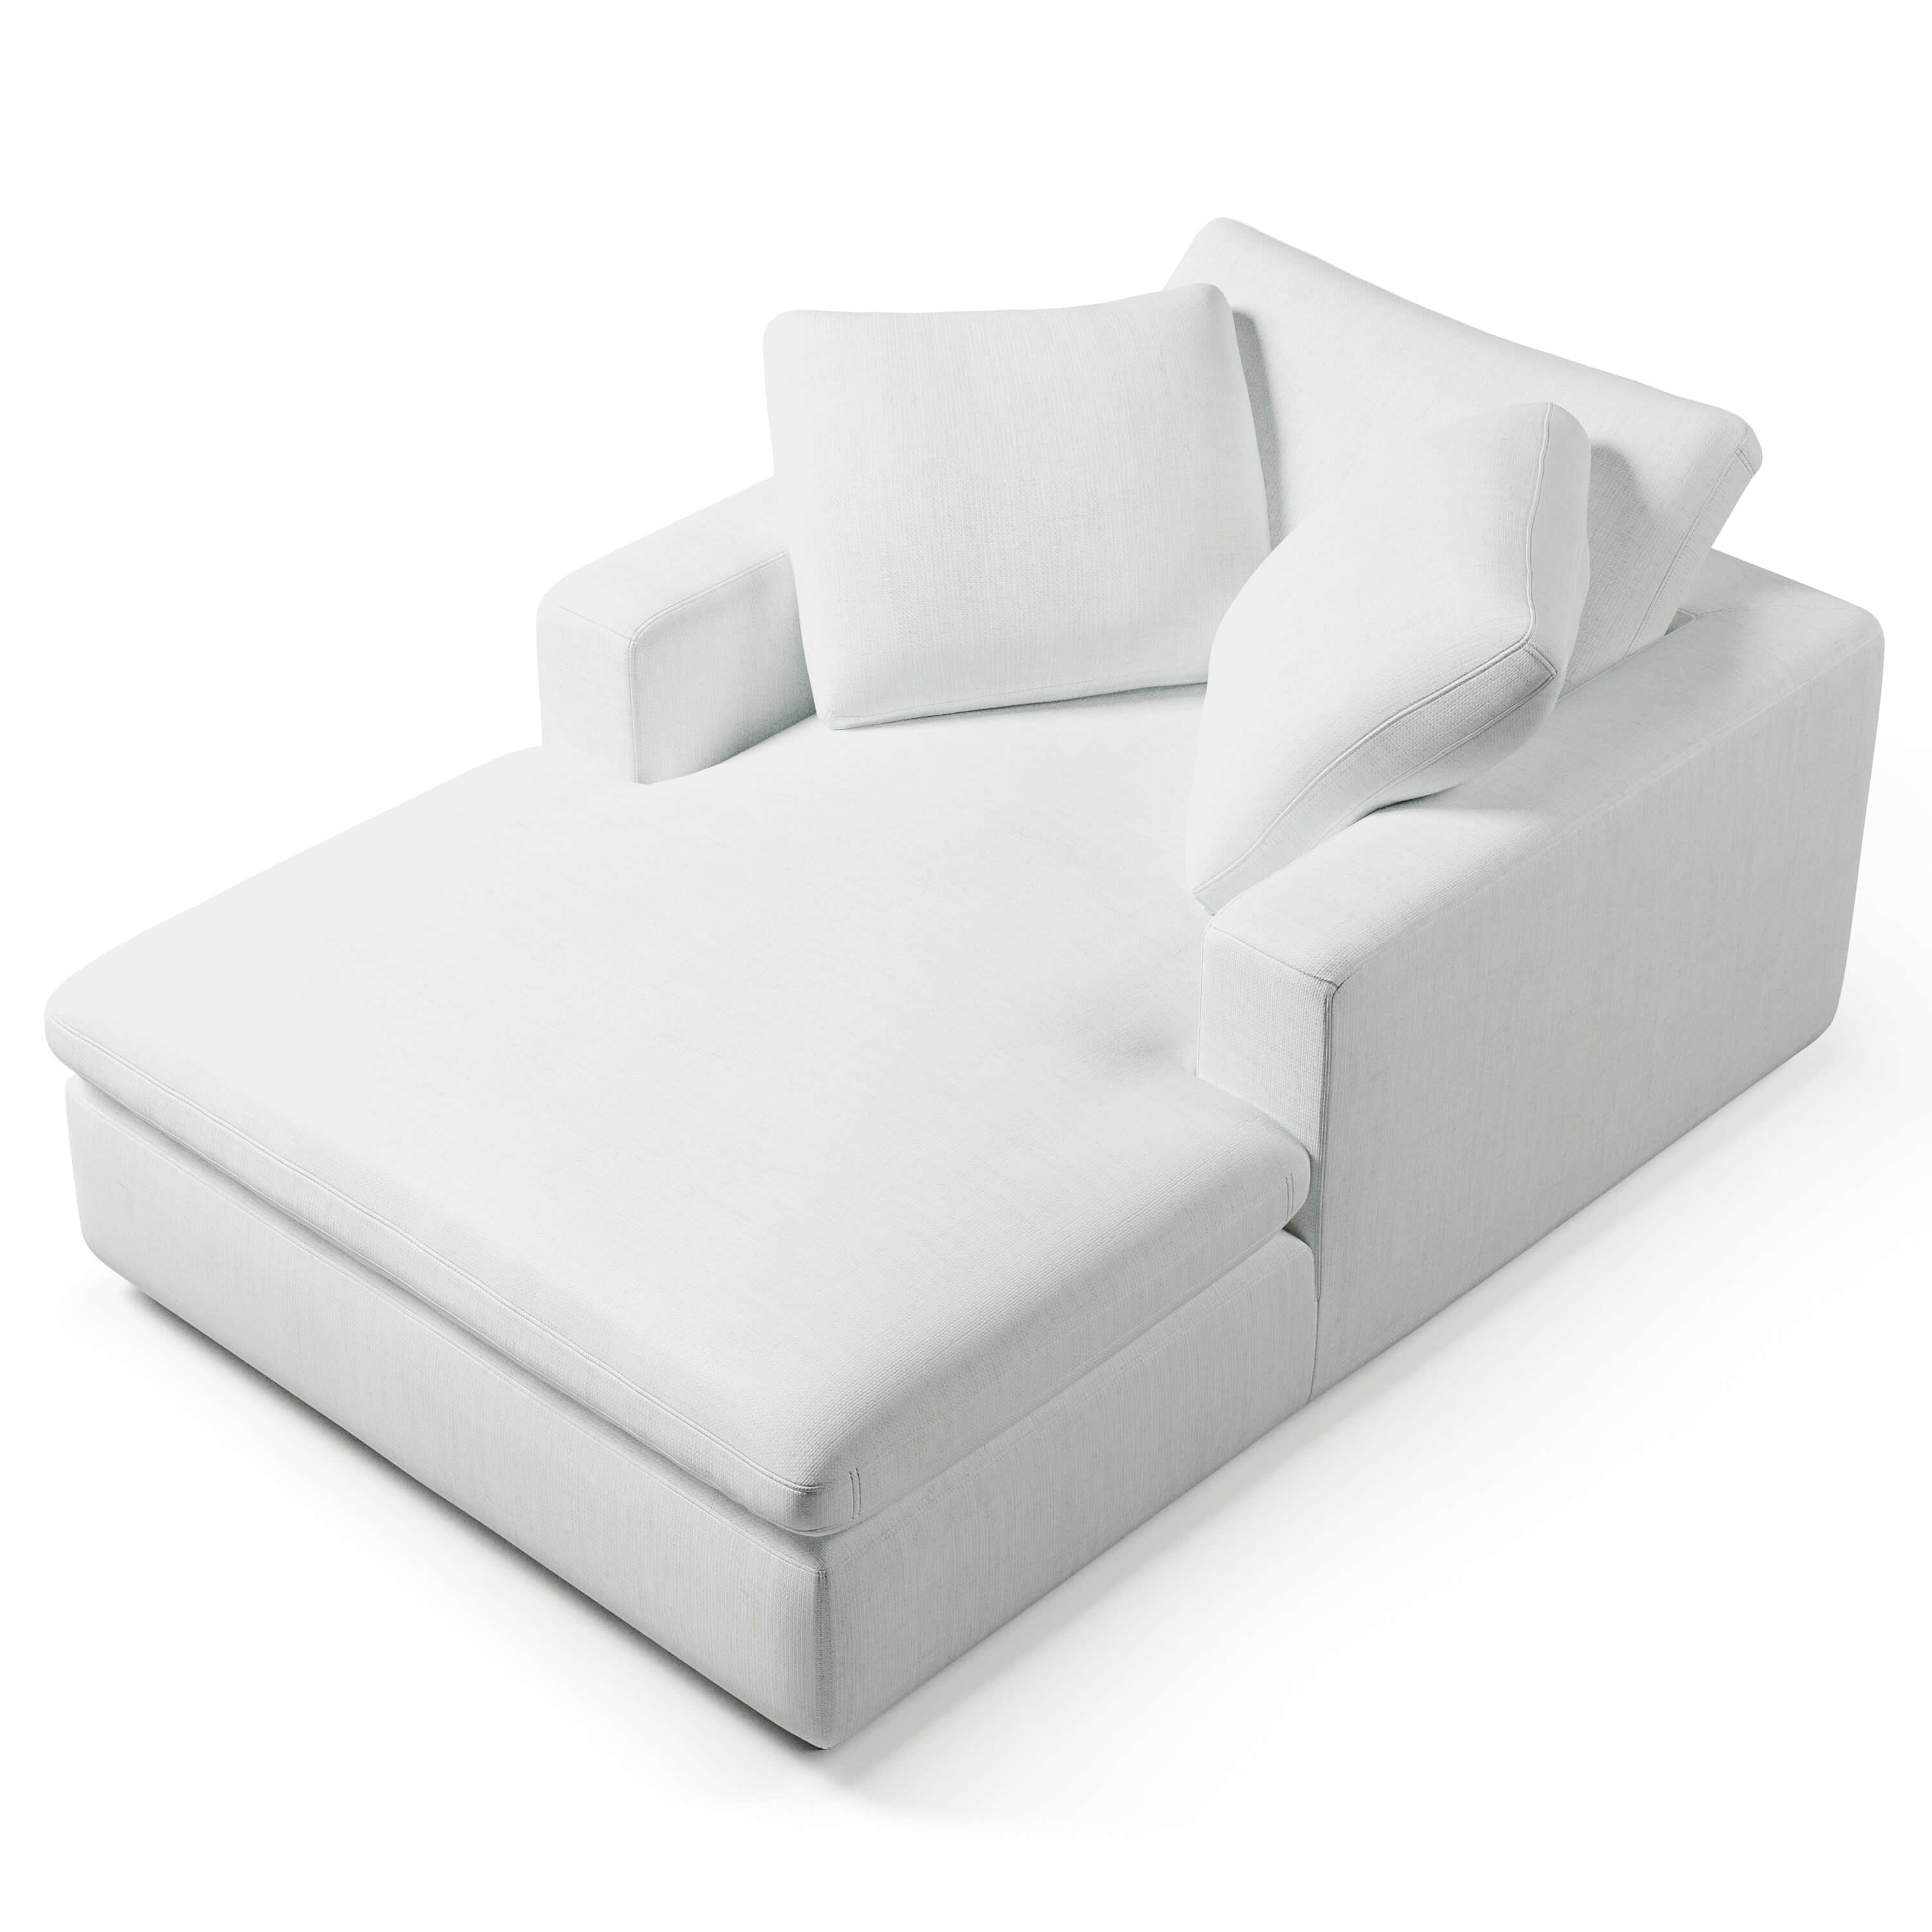 Comfy Chaise Lounge | Chaise Lounge Chair | Couch Haus